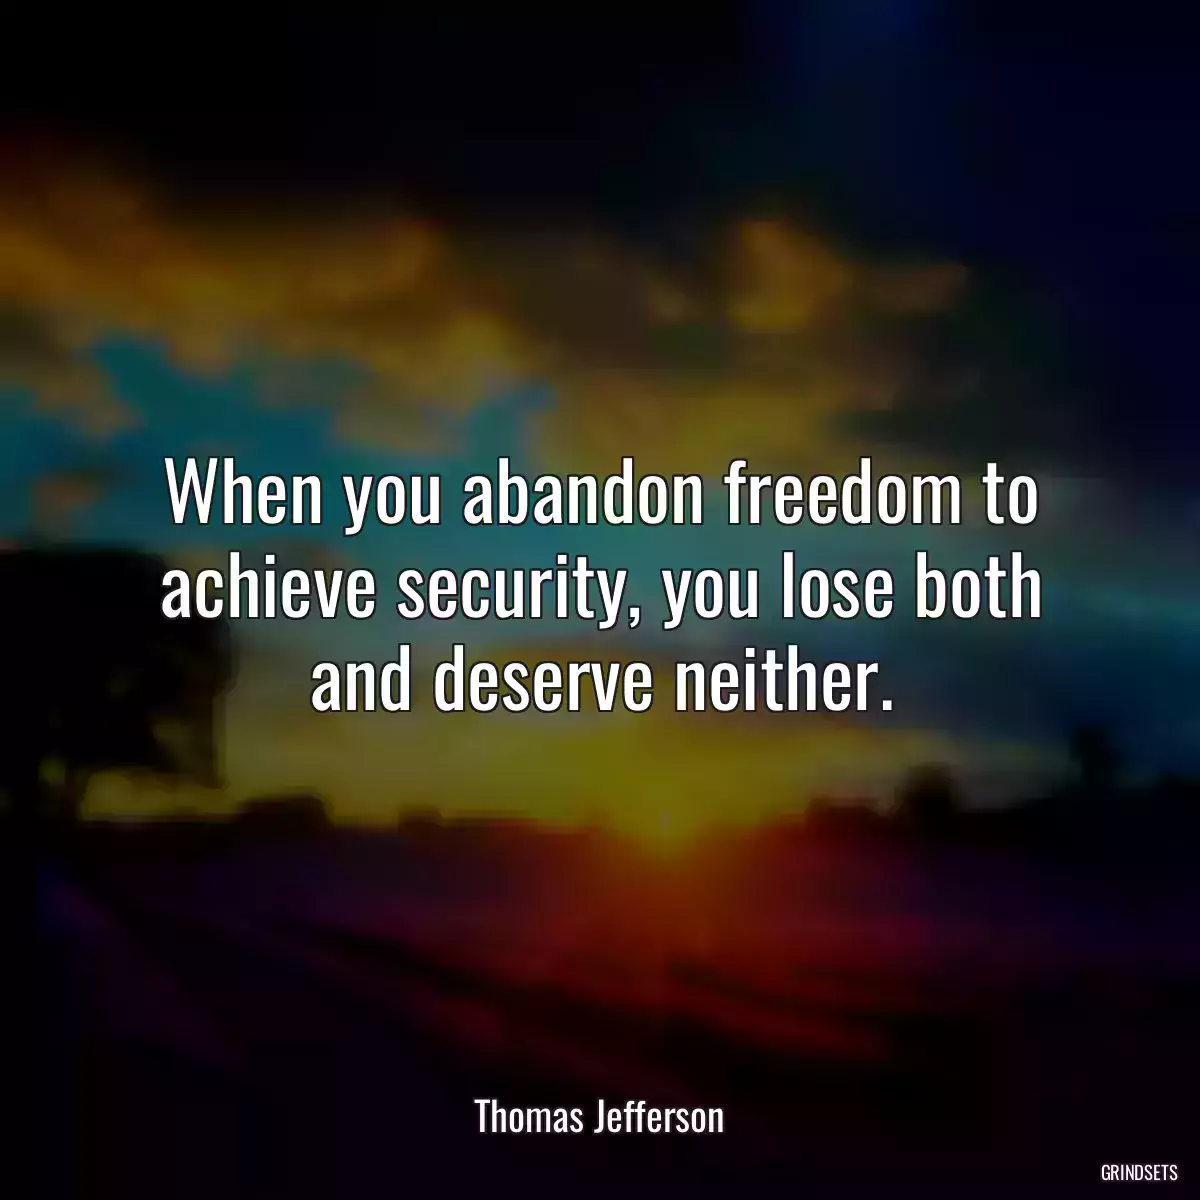 When you abandon freedom to achieve security, you lose both and deserve neither.